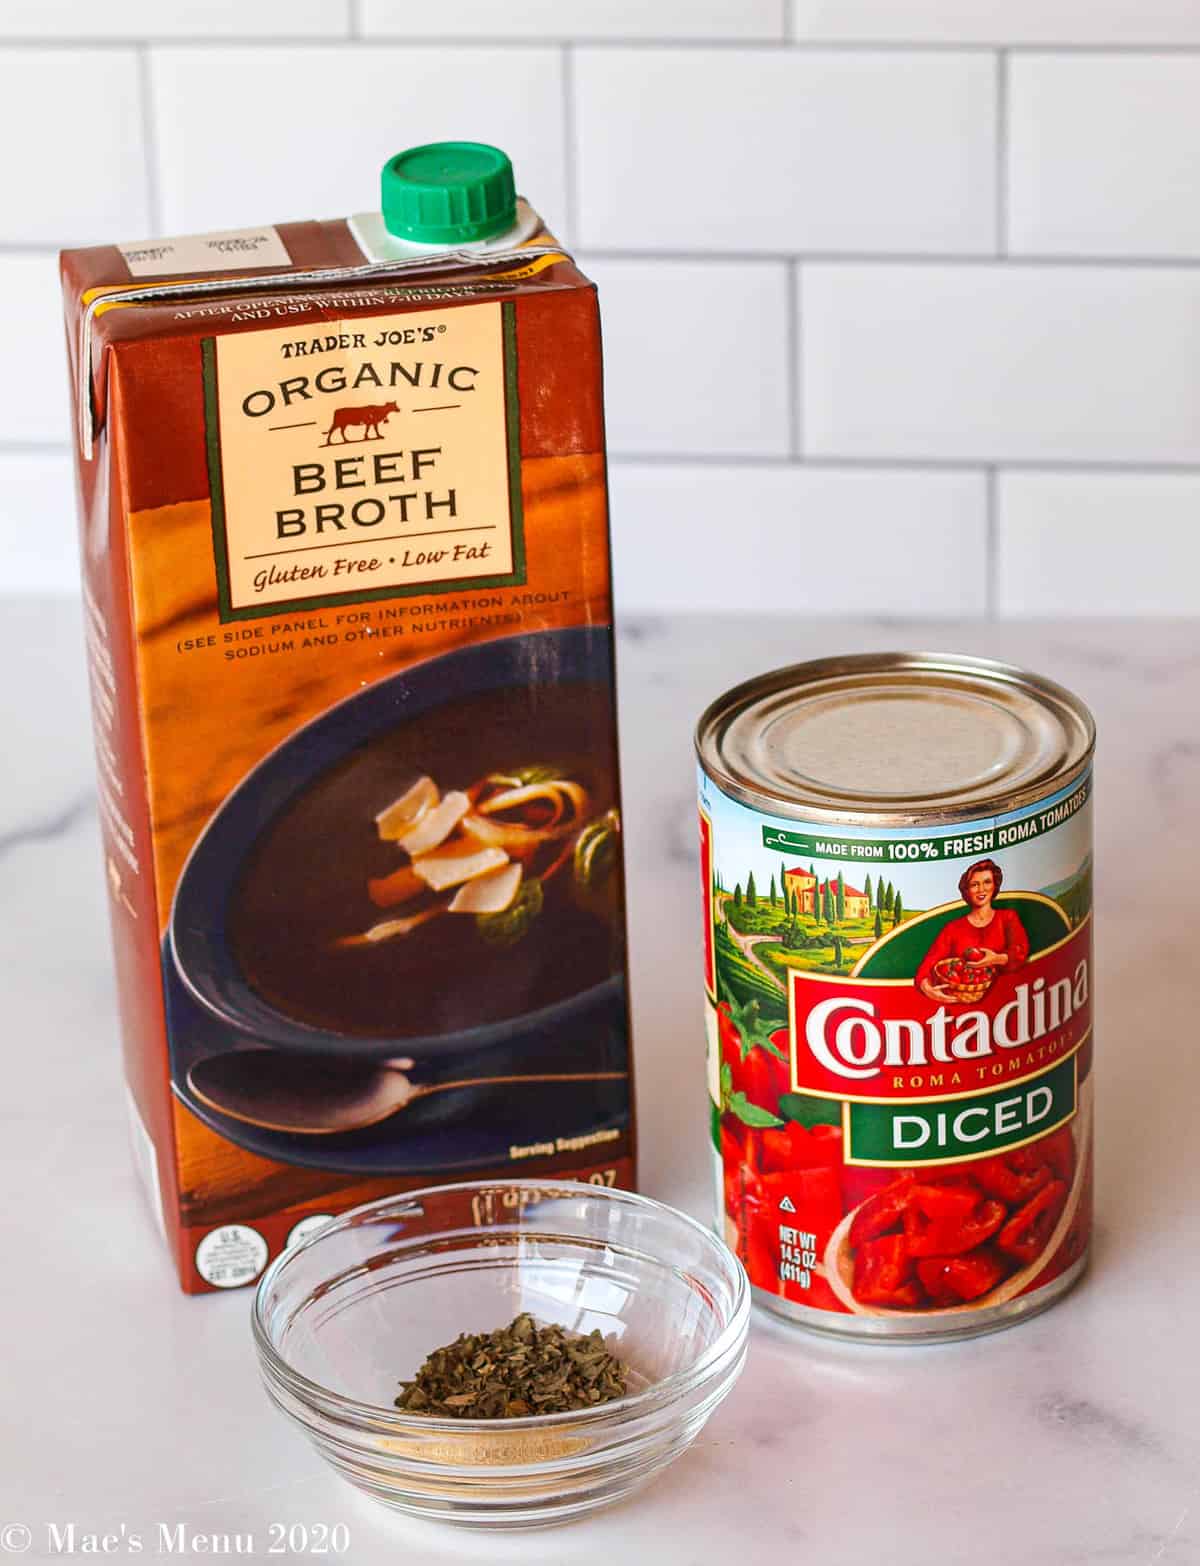 A can of tomatoes, quart of beef soup, and small dish of seasonings for the soup